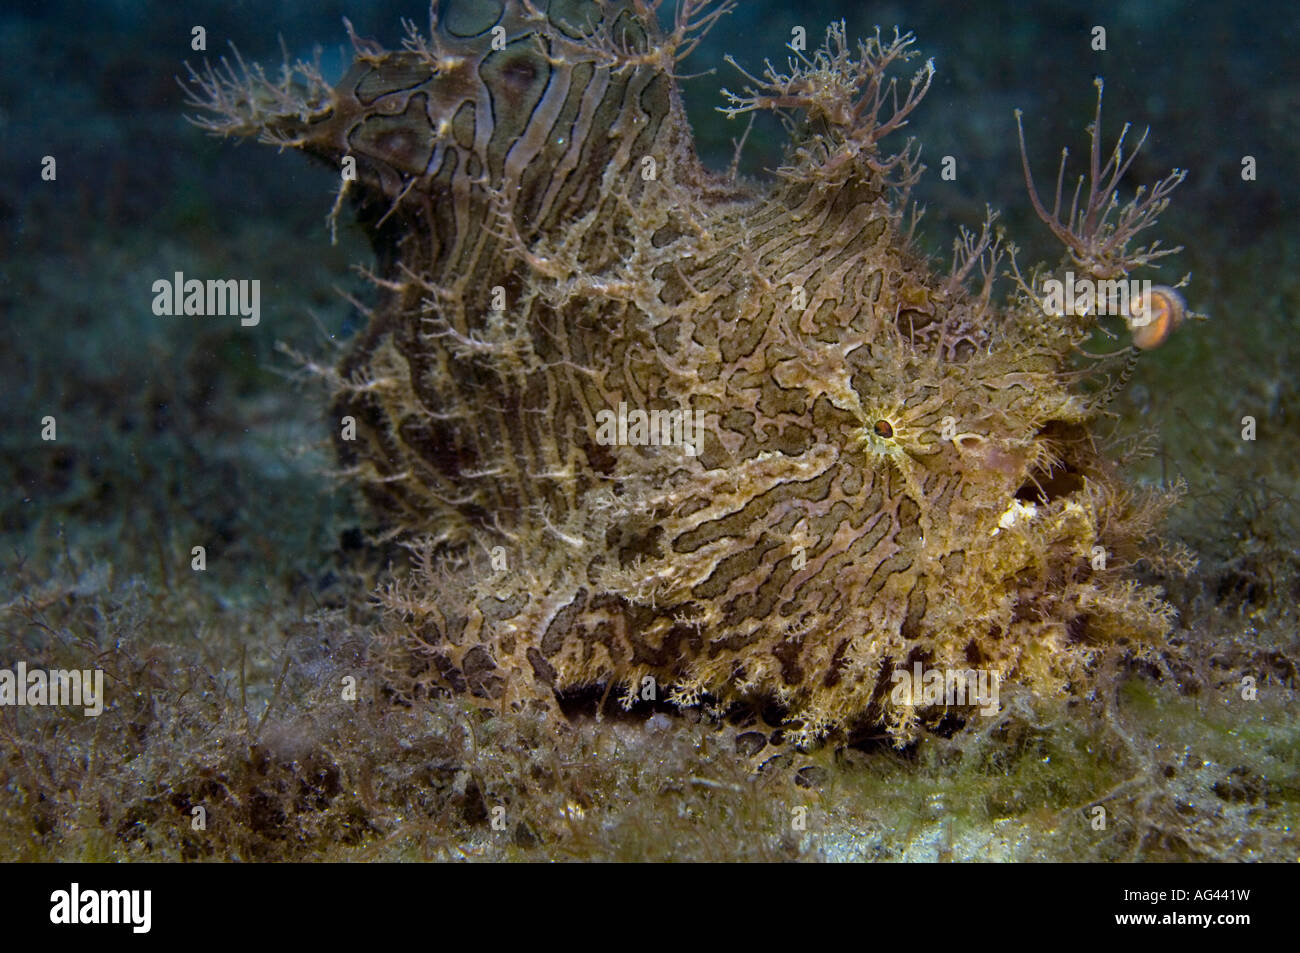 Striated Frogfish (Antennarius striatus), a type of angler fish, in Singer Island, FL. Stock Photo